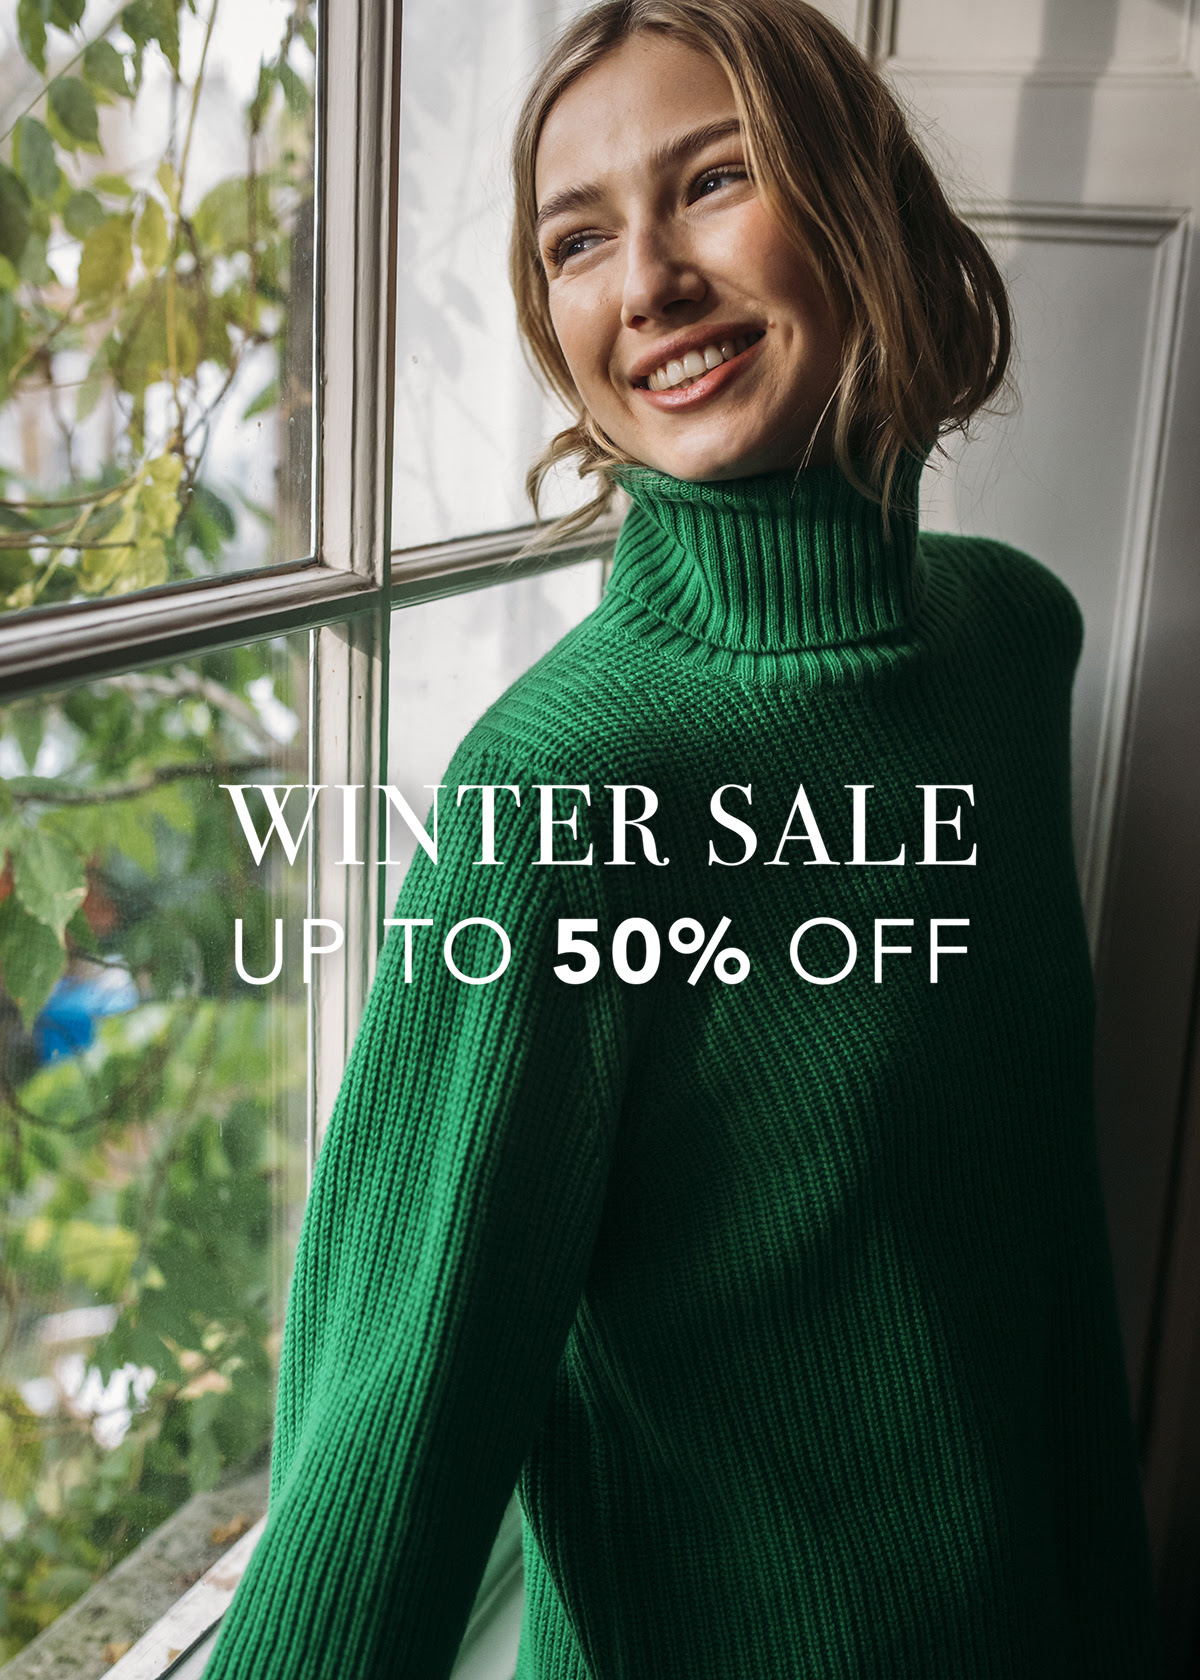 Winter Sale Up to 50% Off